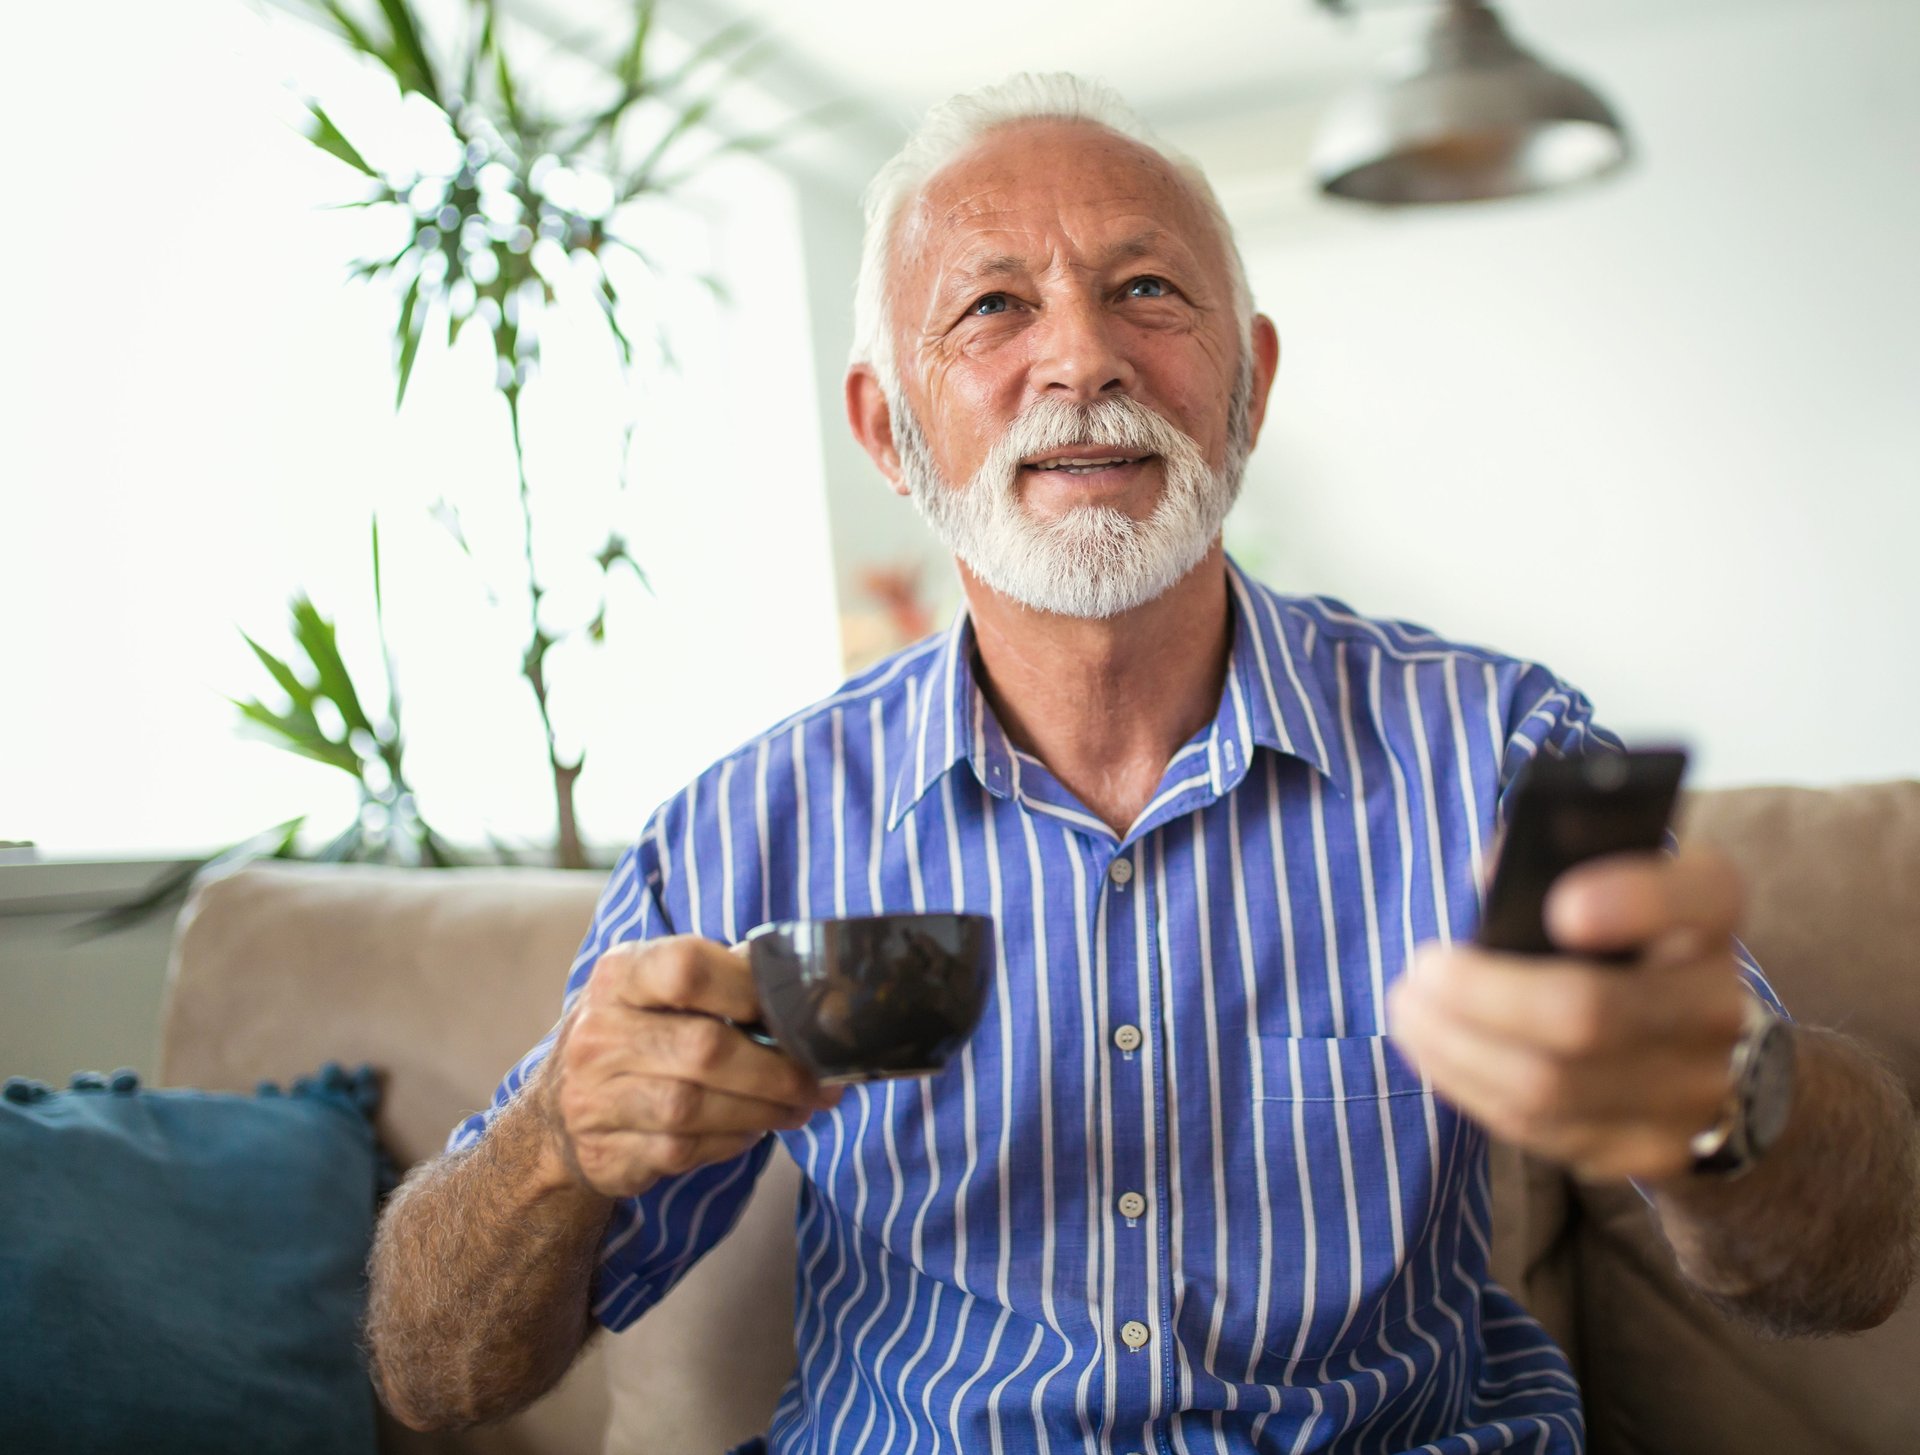 A senior man holds a remote control and coffee while watching tv on his sofa